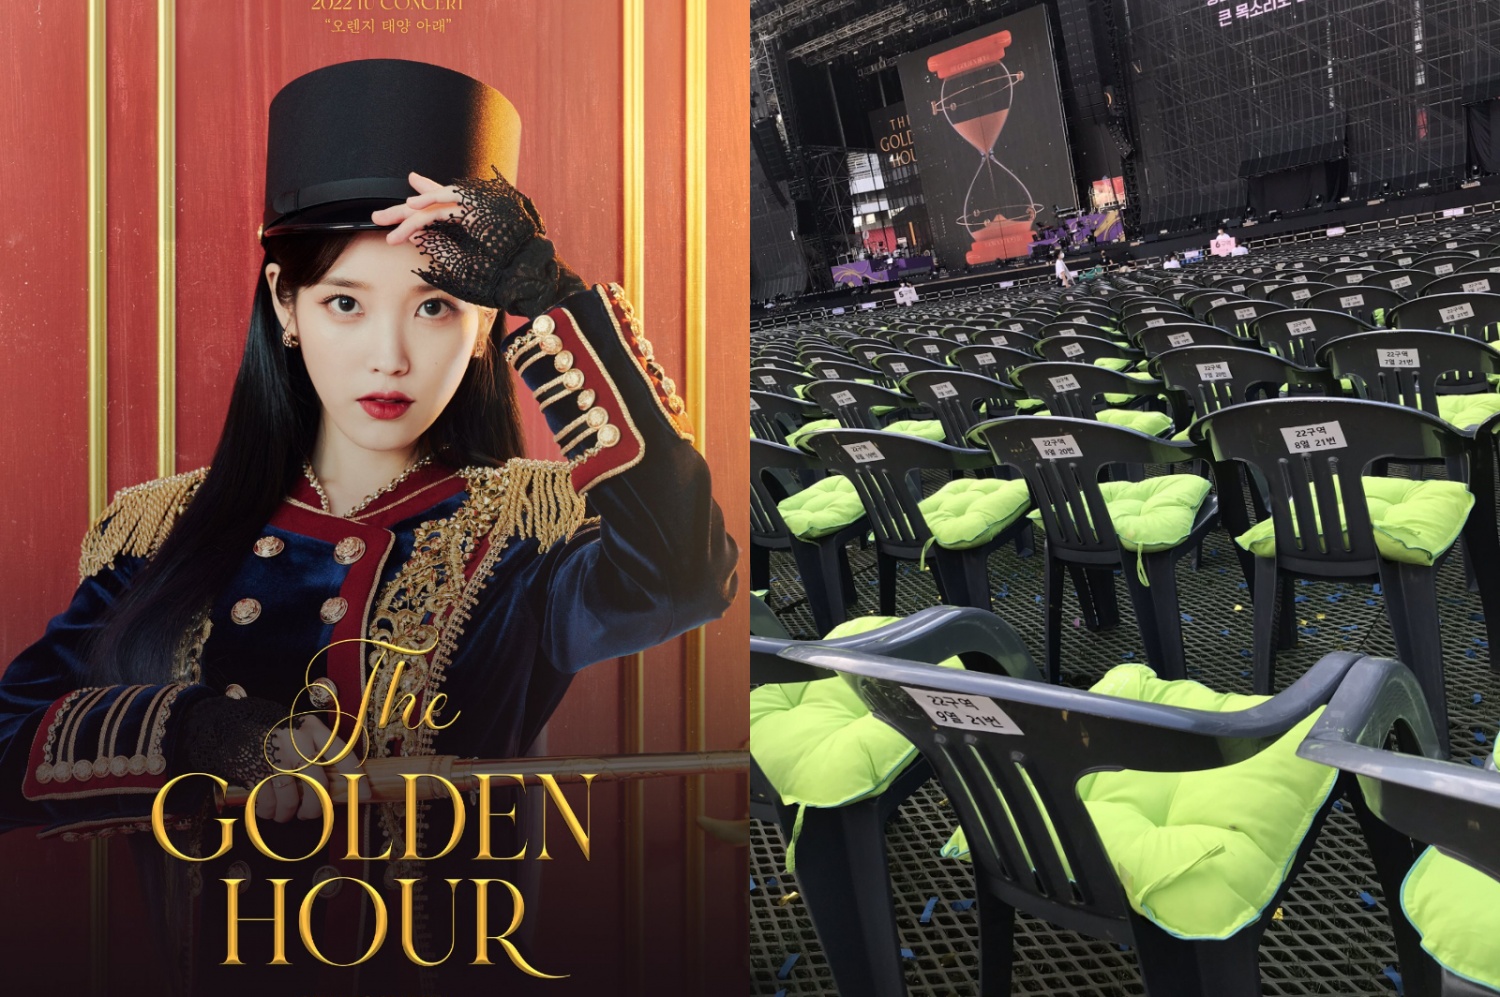 IU reveals her mom got mad at her because of the pillows during the “Golden Hour” concert